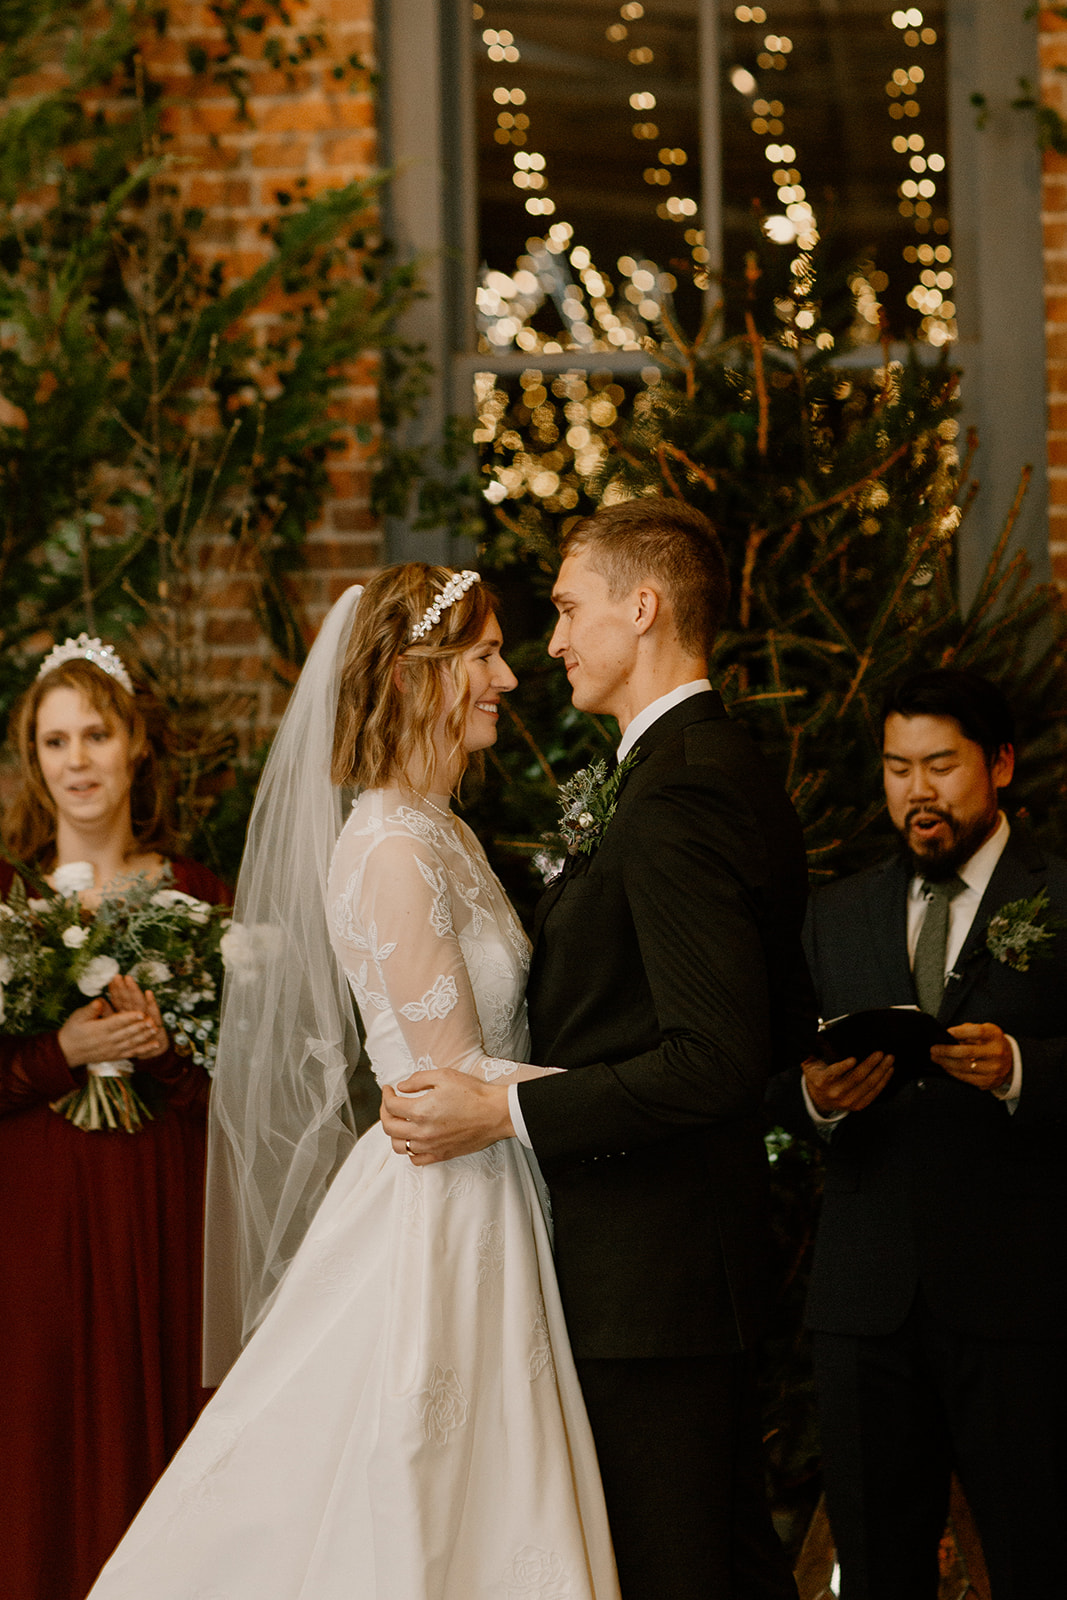 The bride and groom look into each others eyes during the ceremony with evergreen trees behind them.